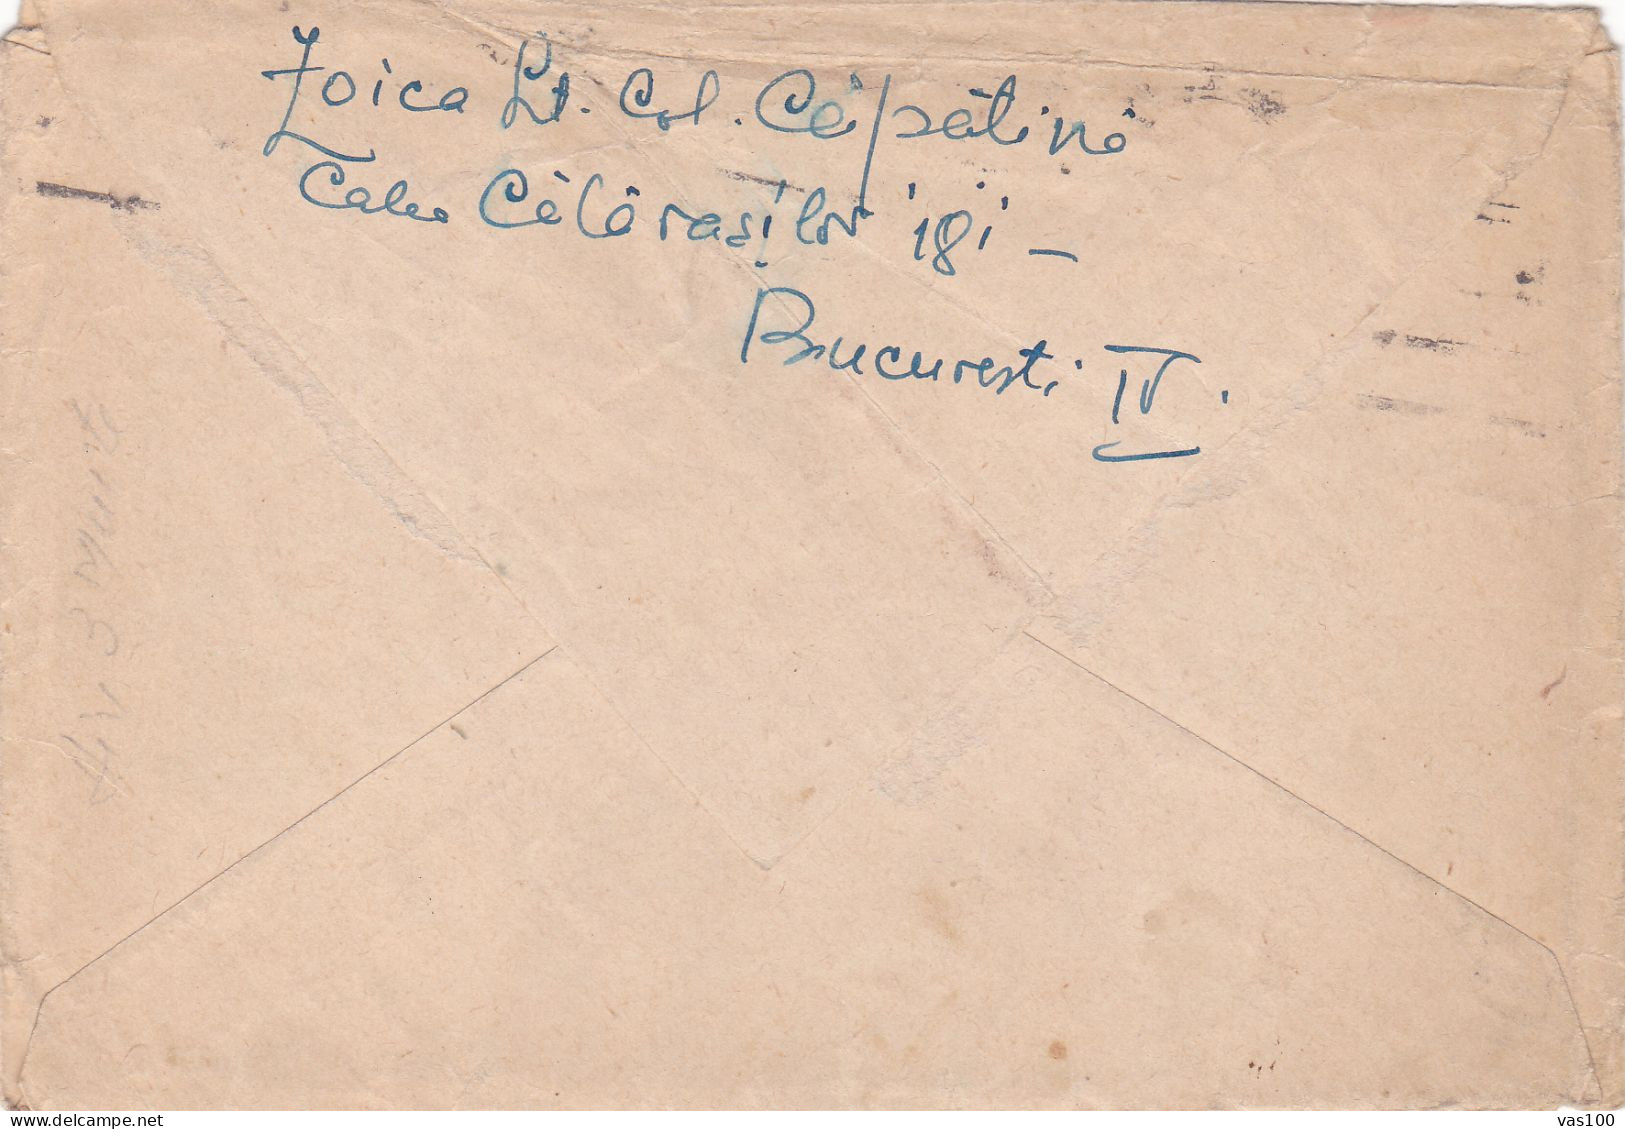 ROMANIA , 1945, WWII CENSORED,  ENVELOPE SENDED TO BATTLEFIELD - Lettres 2ème Guerre Mondiale